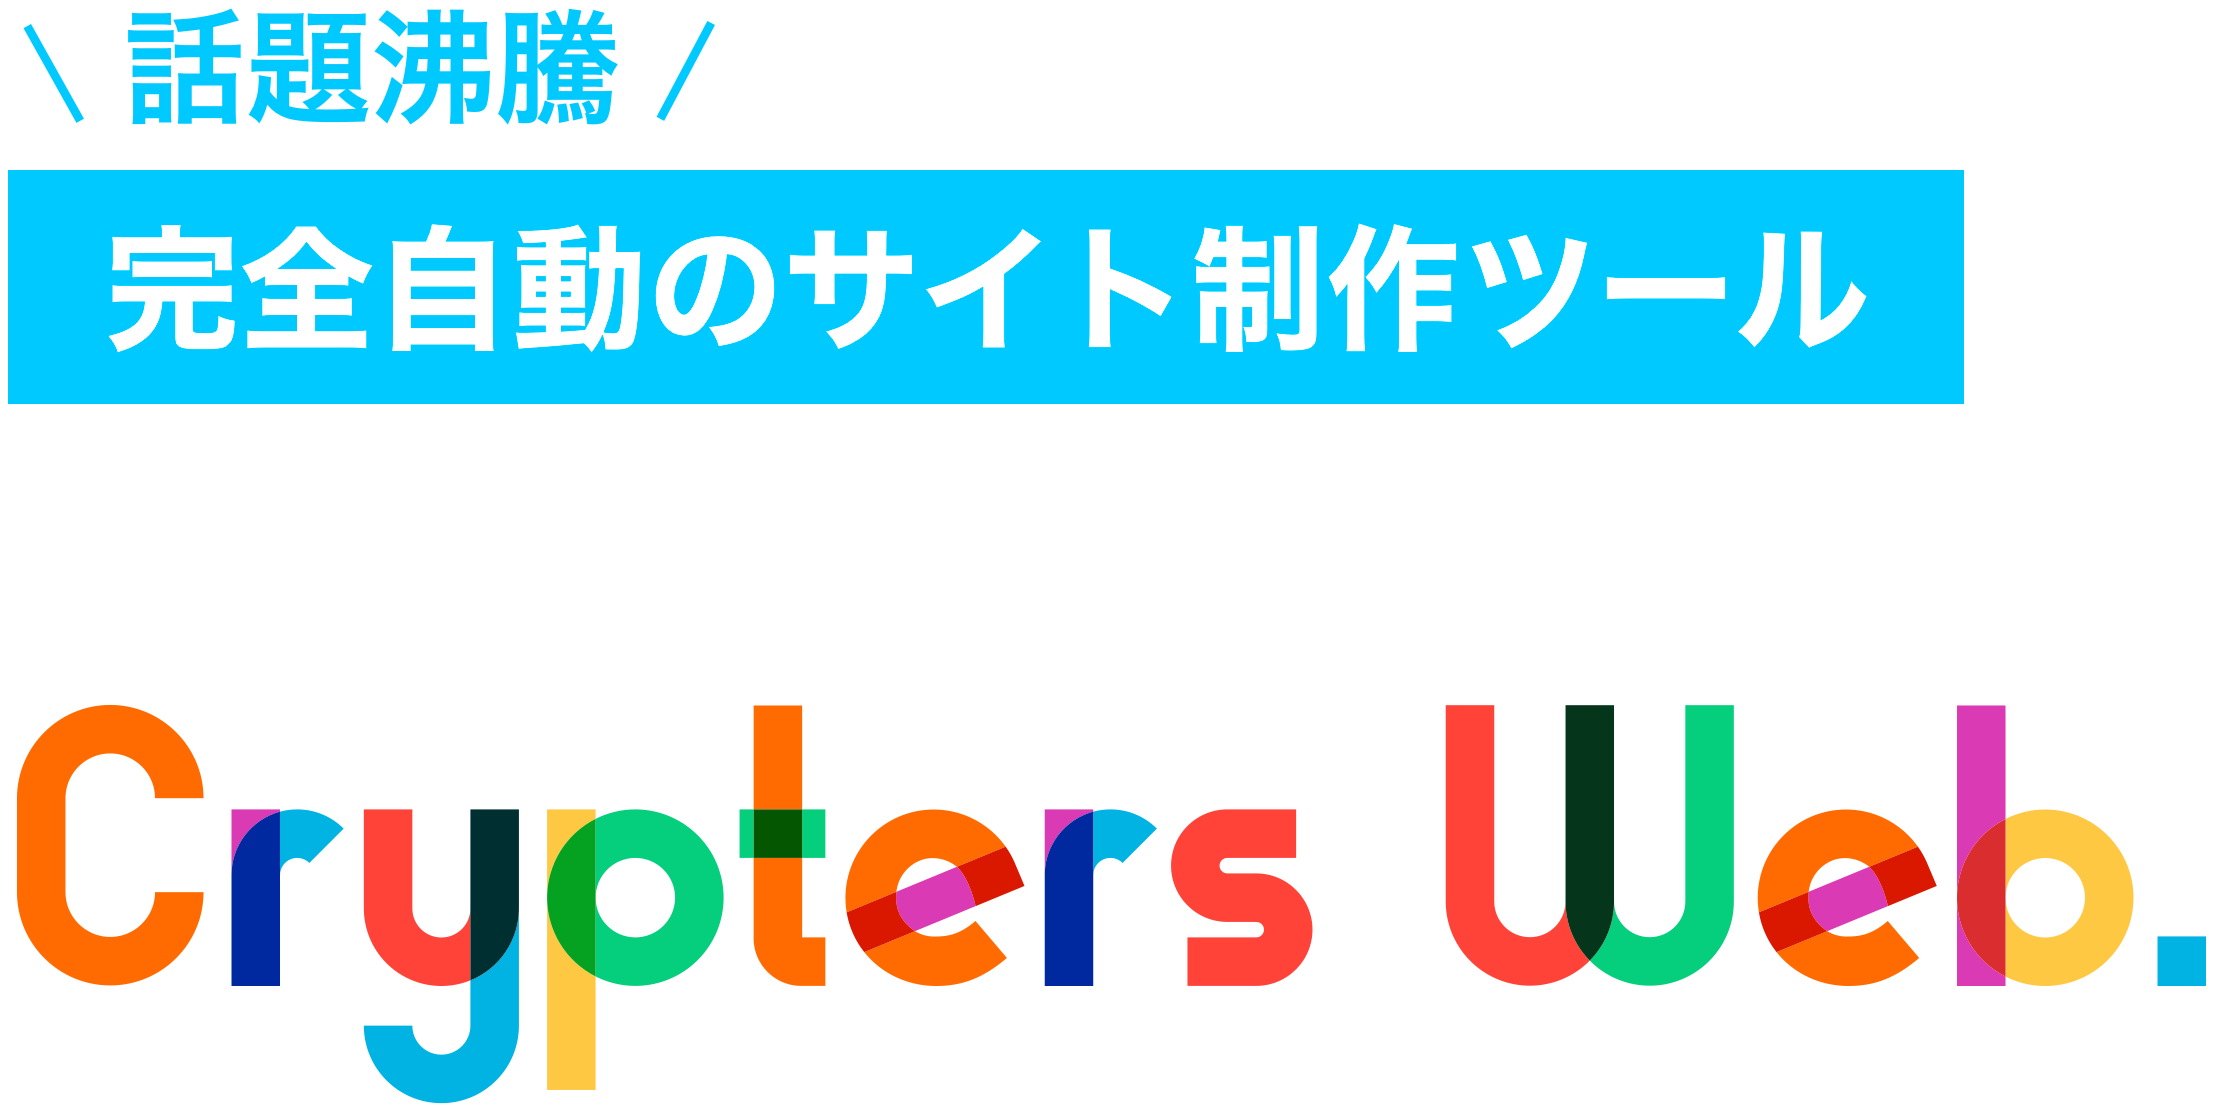 Crypters Media 完全自動のサイト制作